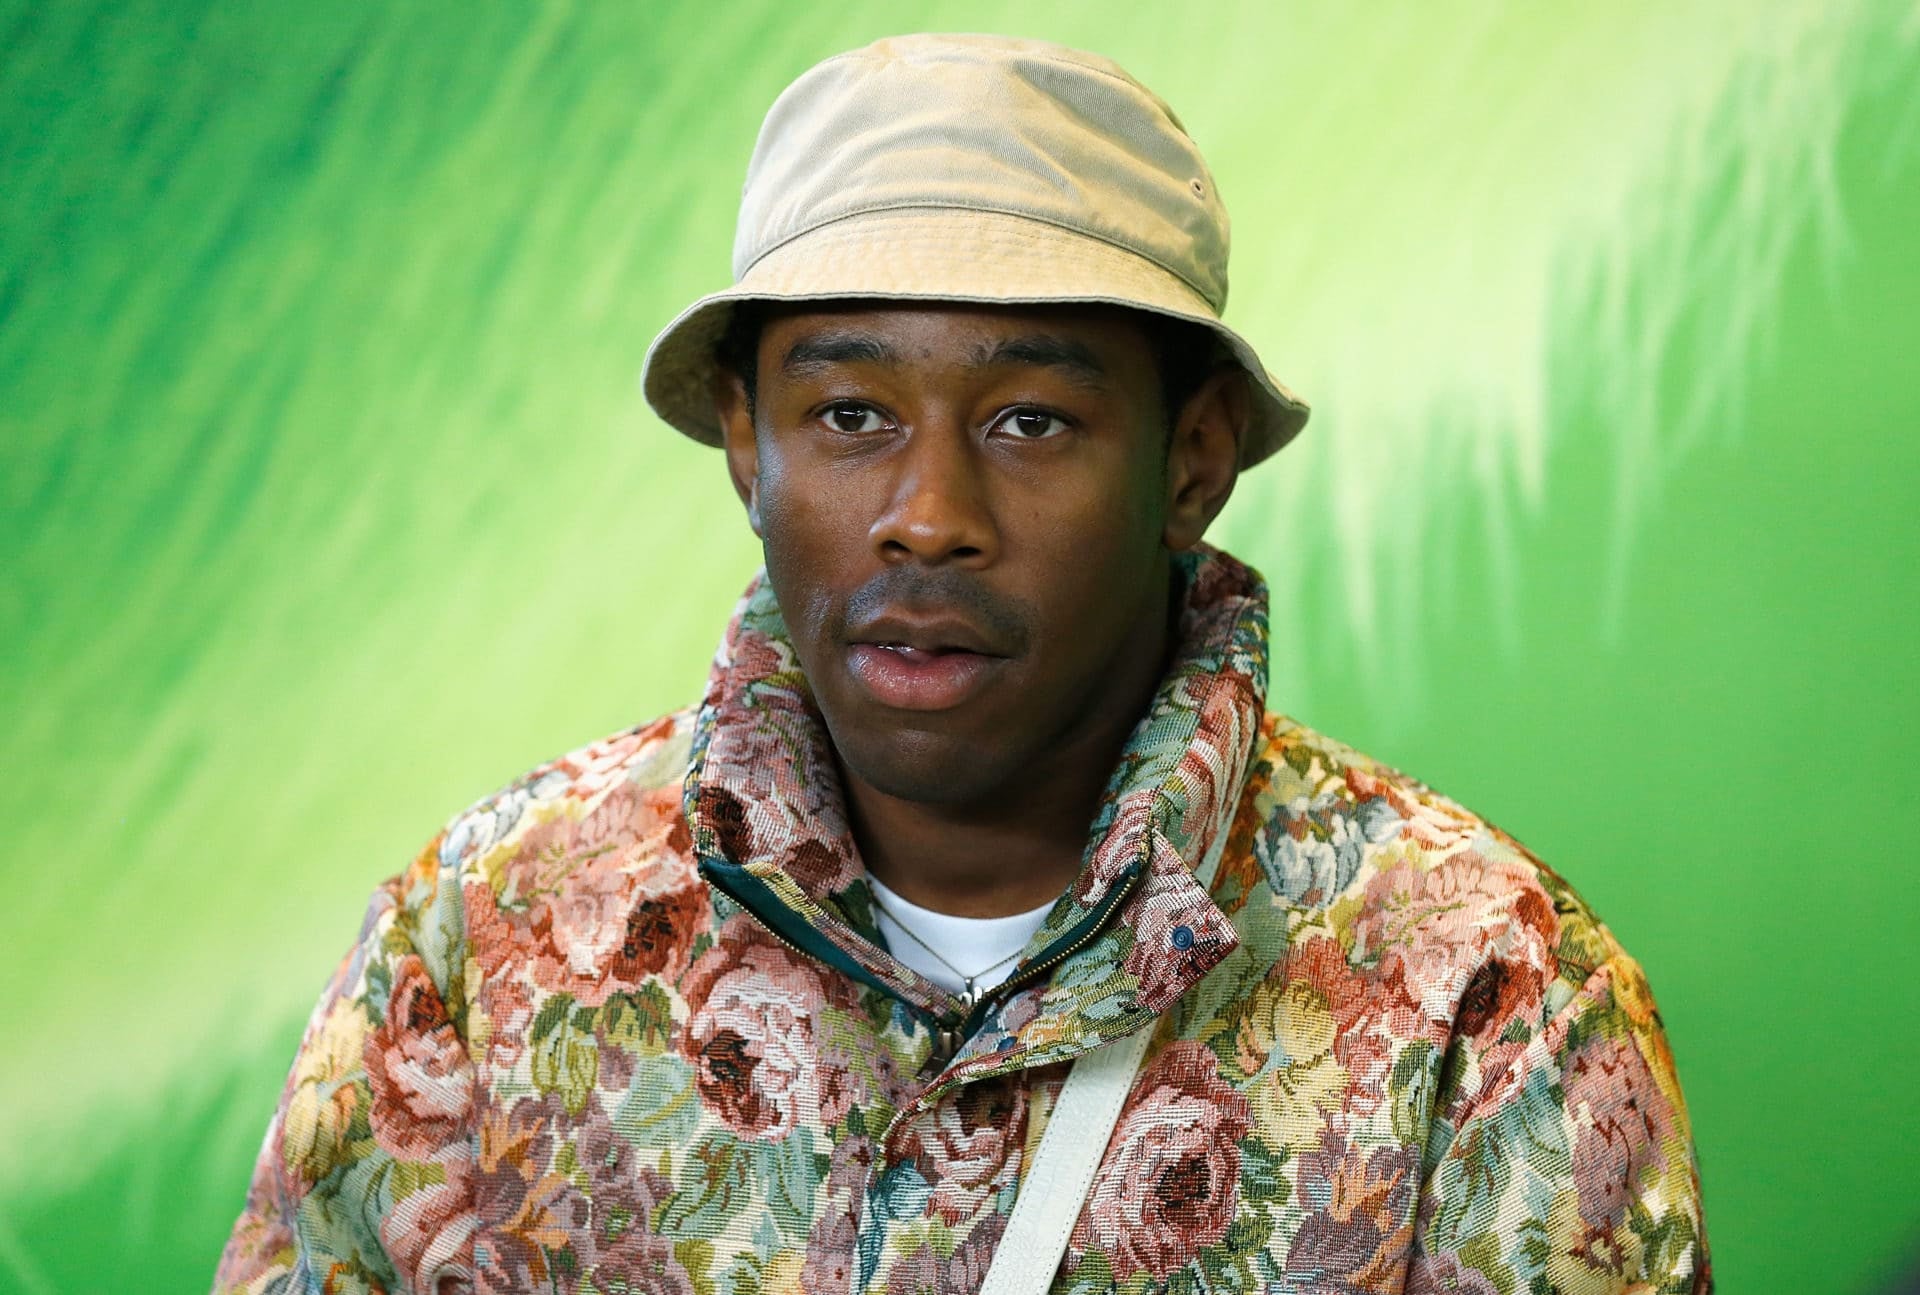 Watch Tyler, The Creator Get Super Excited About Being Part Of ‘The Grinch’ Soundtrack